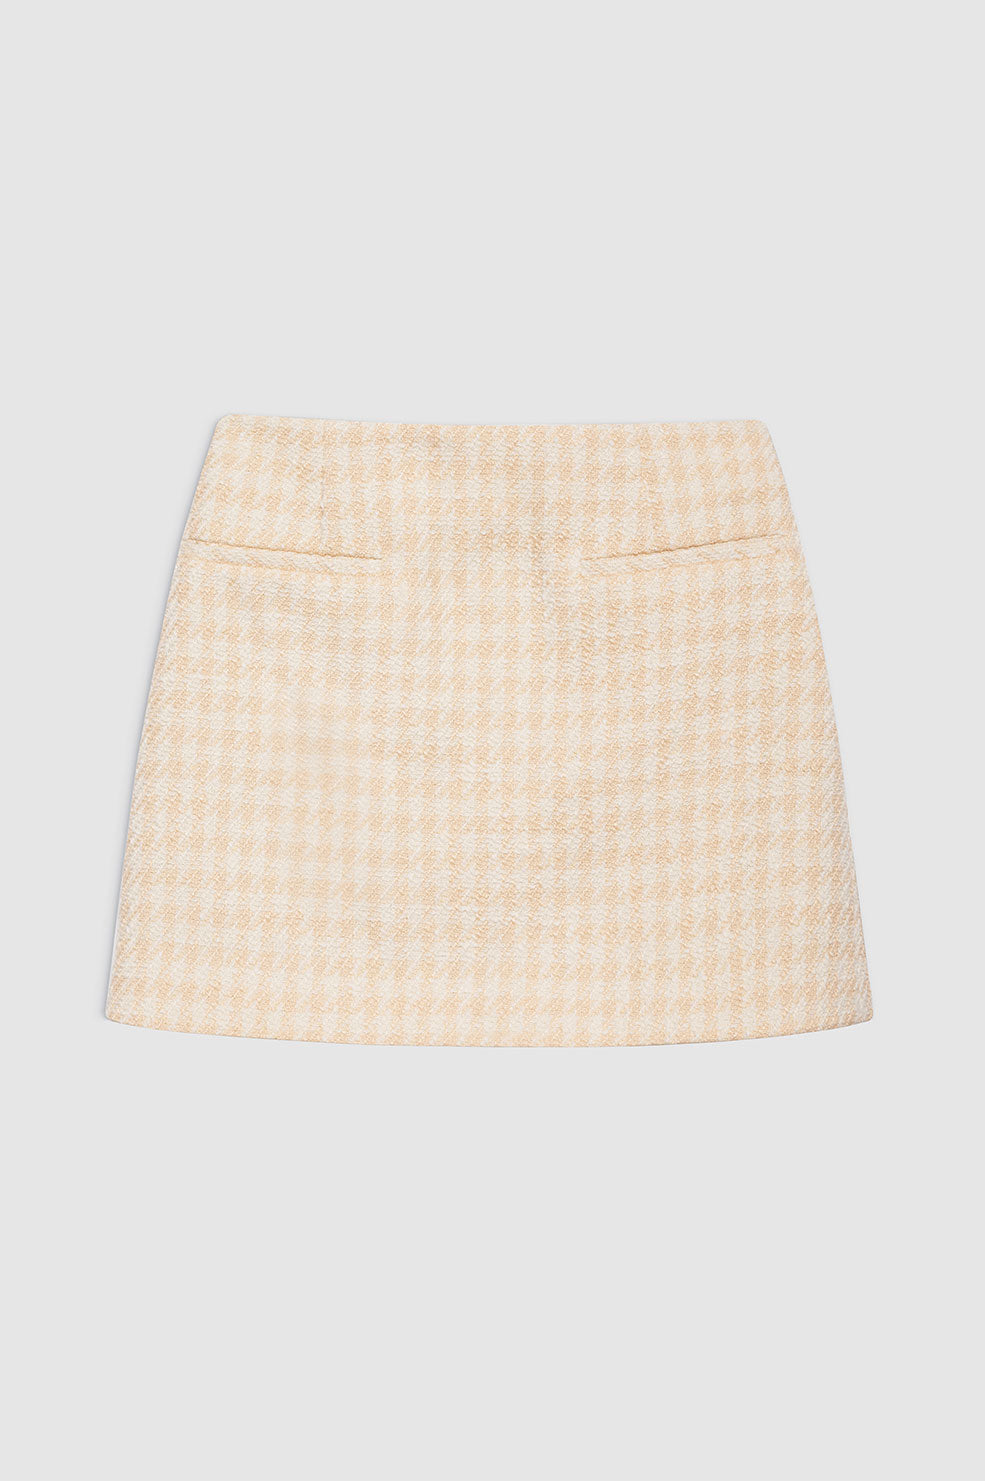 ANINE BING Vanessa Skirt - Cream And Peach Houndstooth - Front View